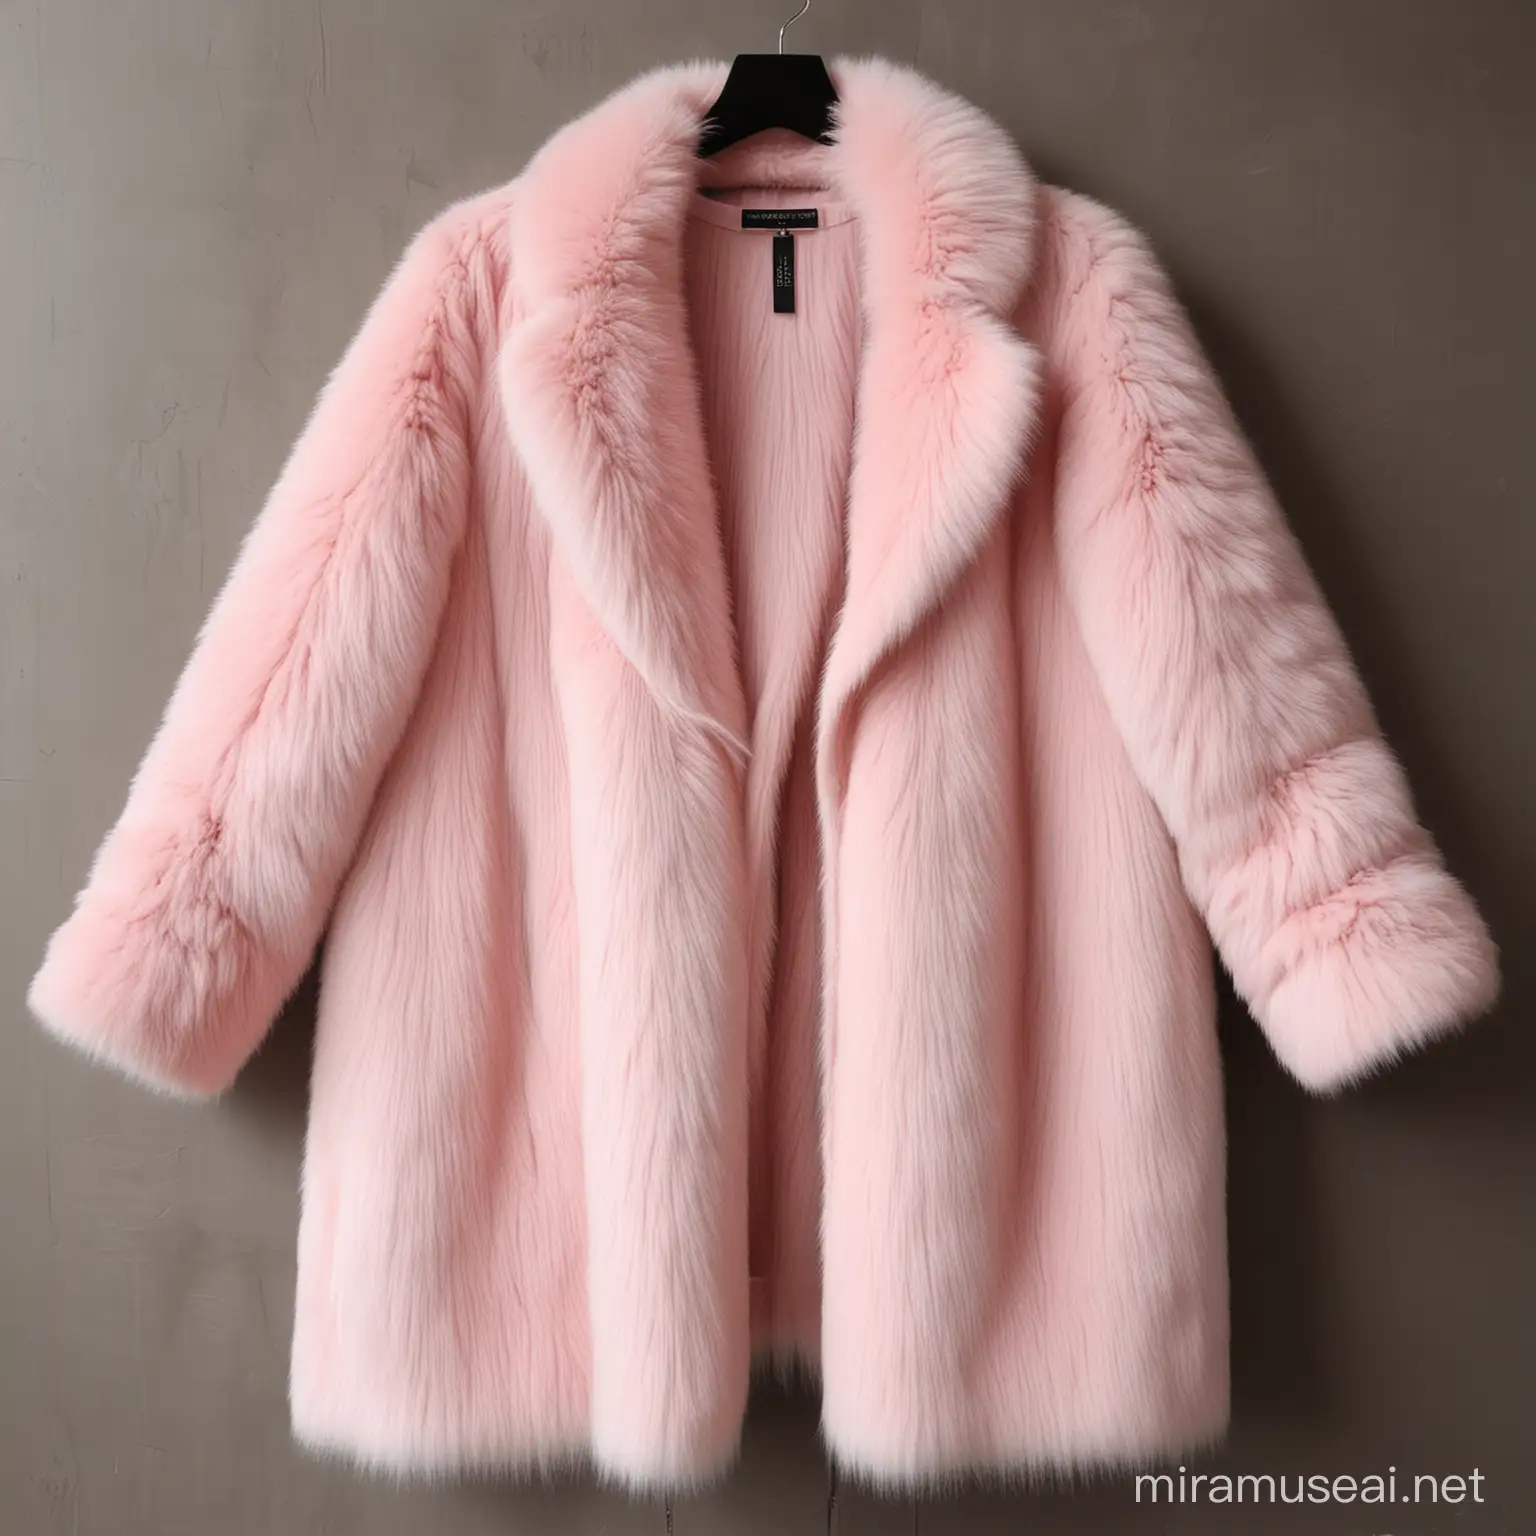 Luxurious Bohemian Fur Coats in White Pink Red and Black